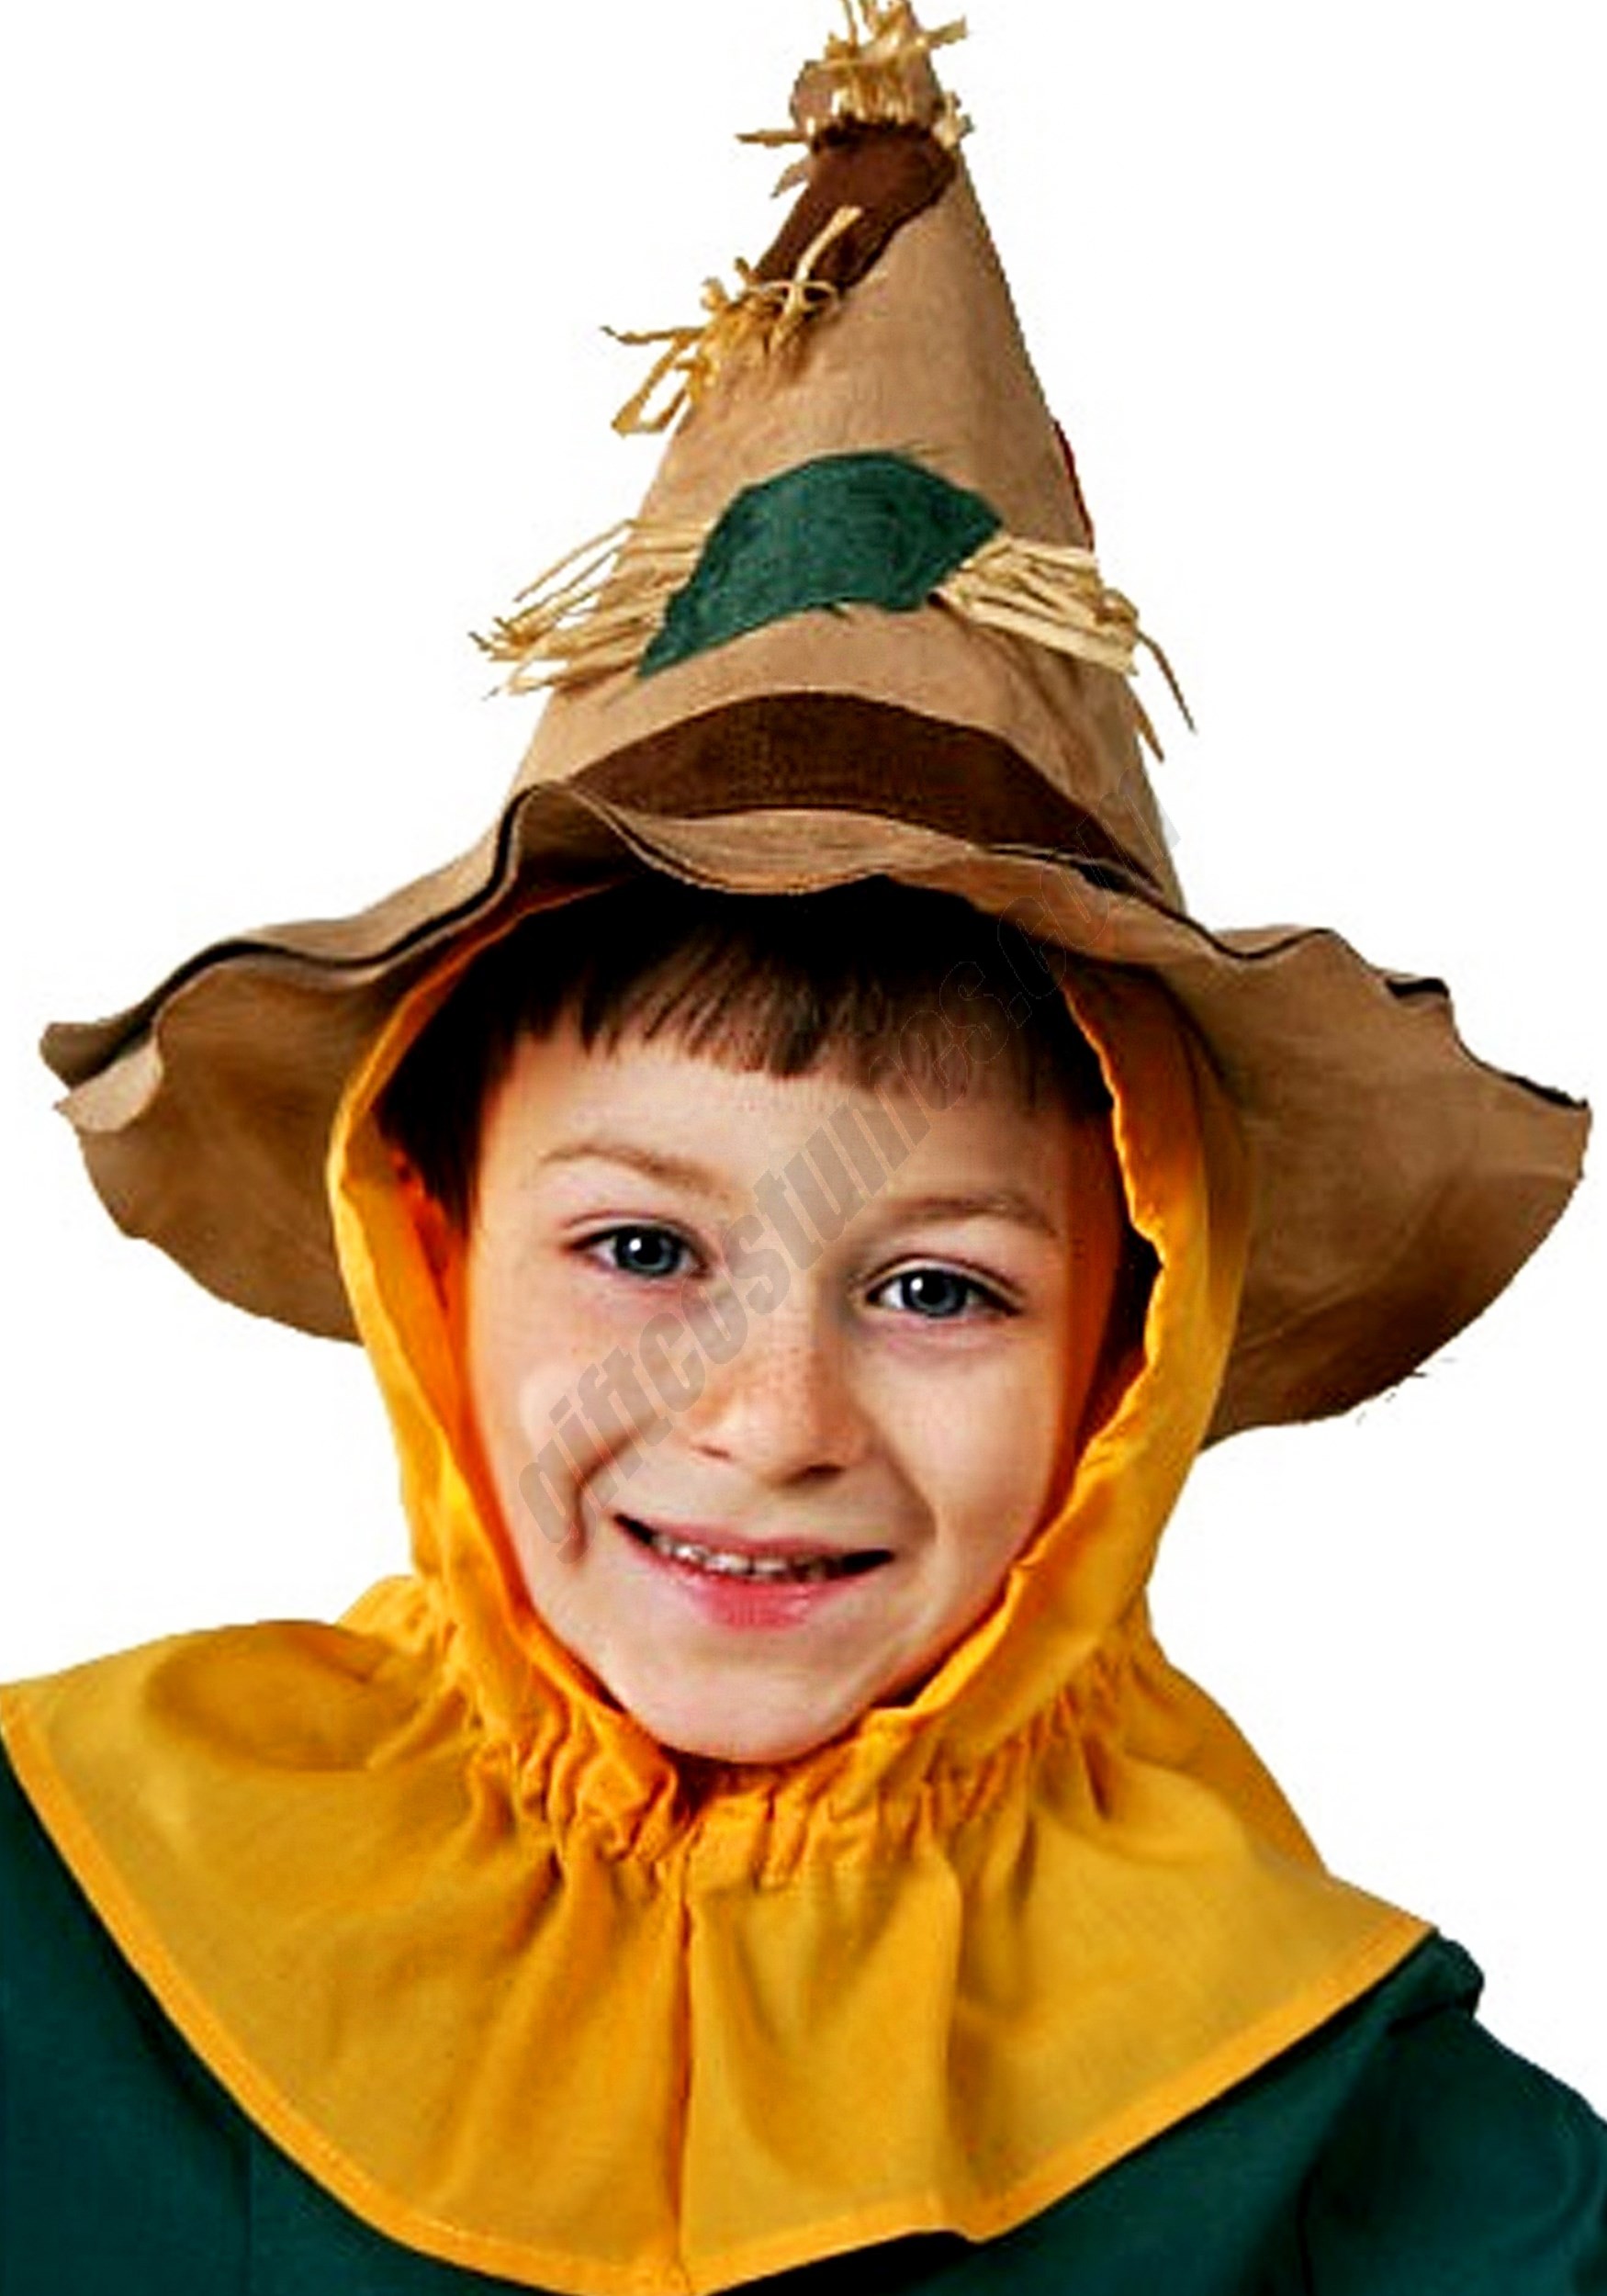 Child Scarecrow Hat Promotions - Child Scarecrow Hat Promotions